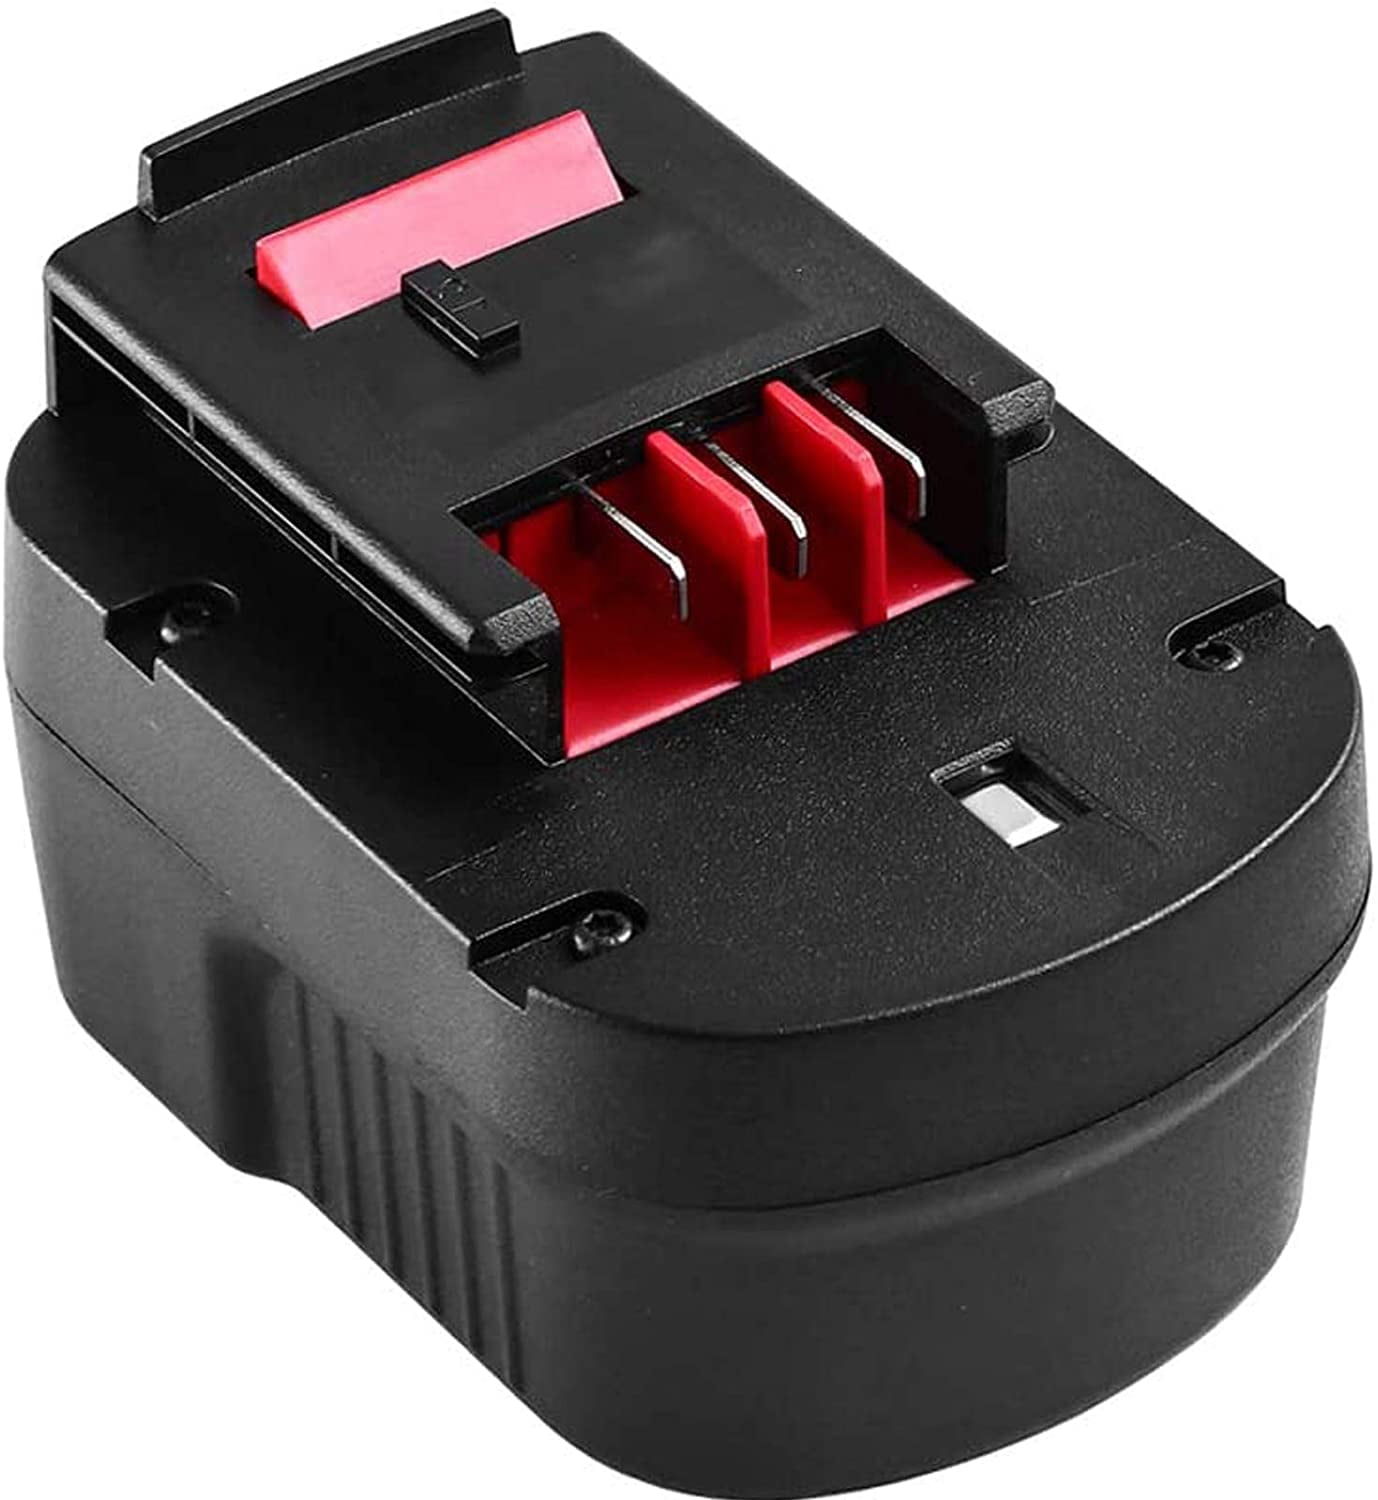  Upgraded to 3600mAh Replacement Battery Compatible with Black  and Decker 12 Volt Battery HBP12 A1712 FS120B FSB12 HPB12 A12 A12-XJ A12EX  FS120B FSB12 FS120BX Cordless Power Tools 2 Packs : Tools